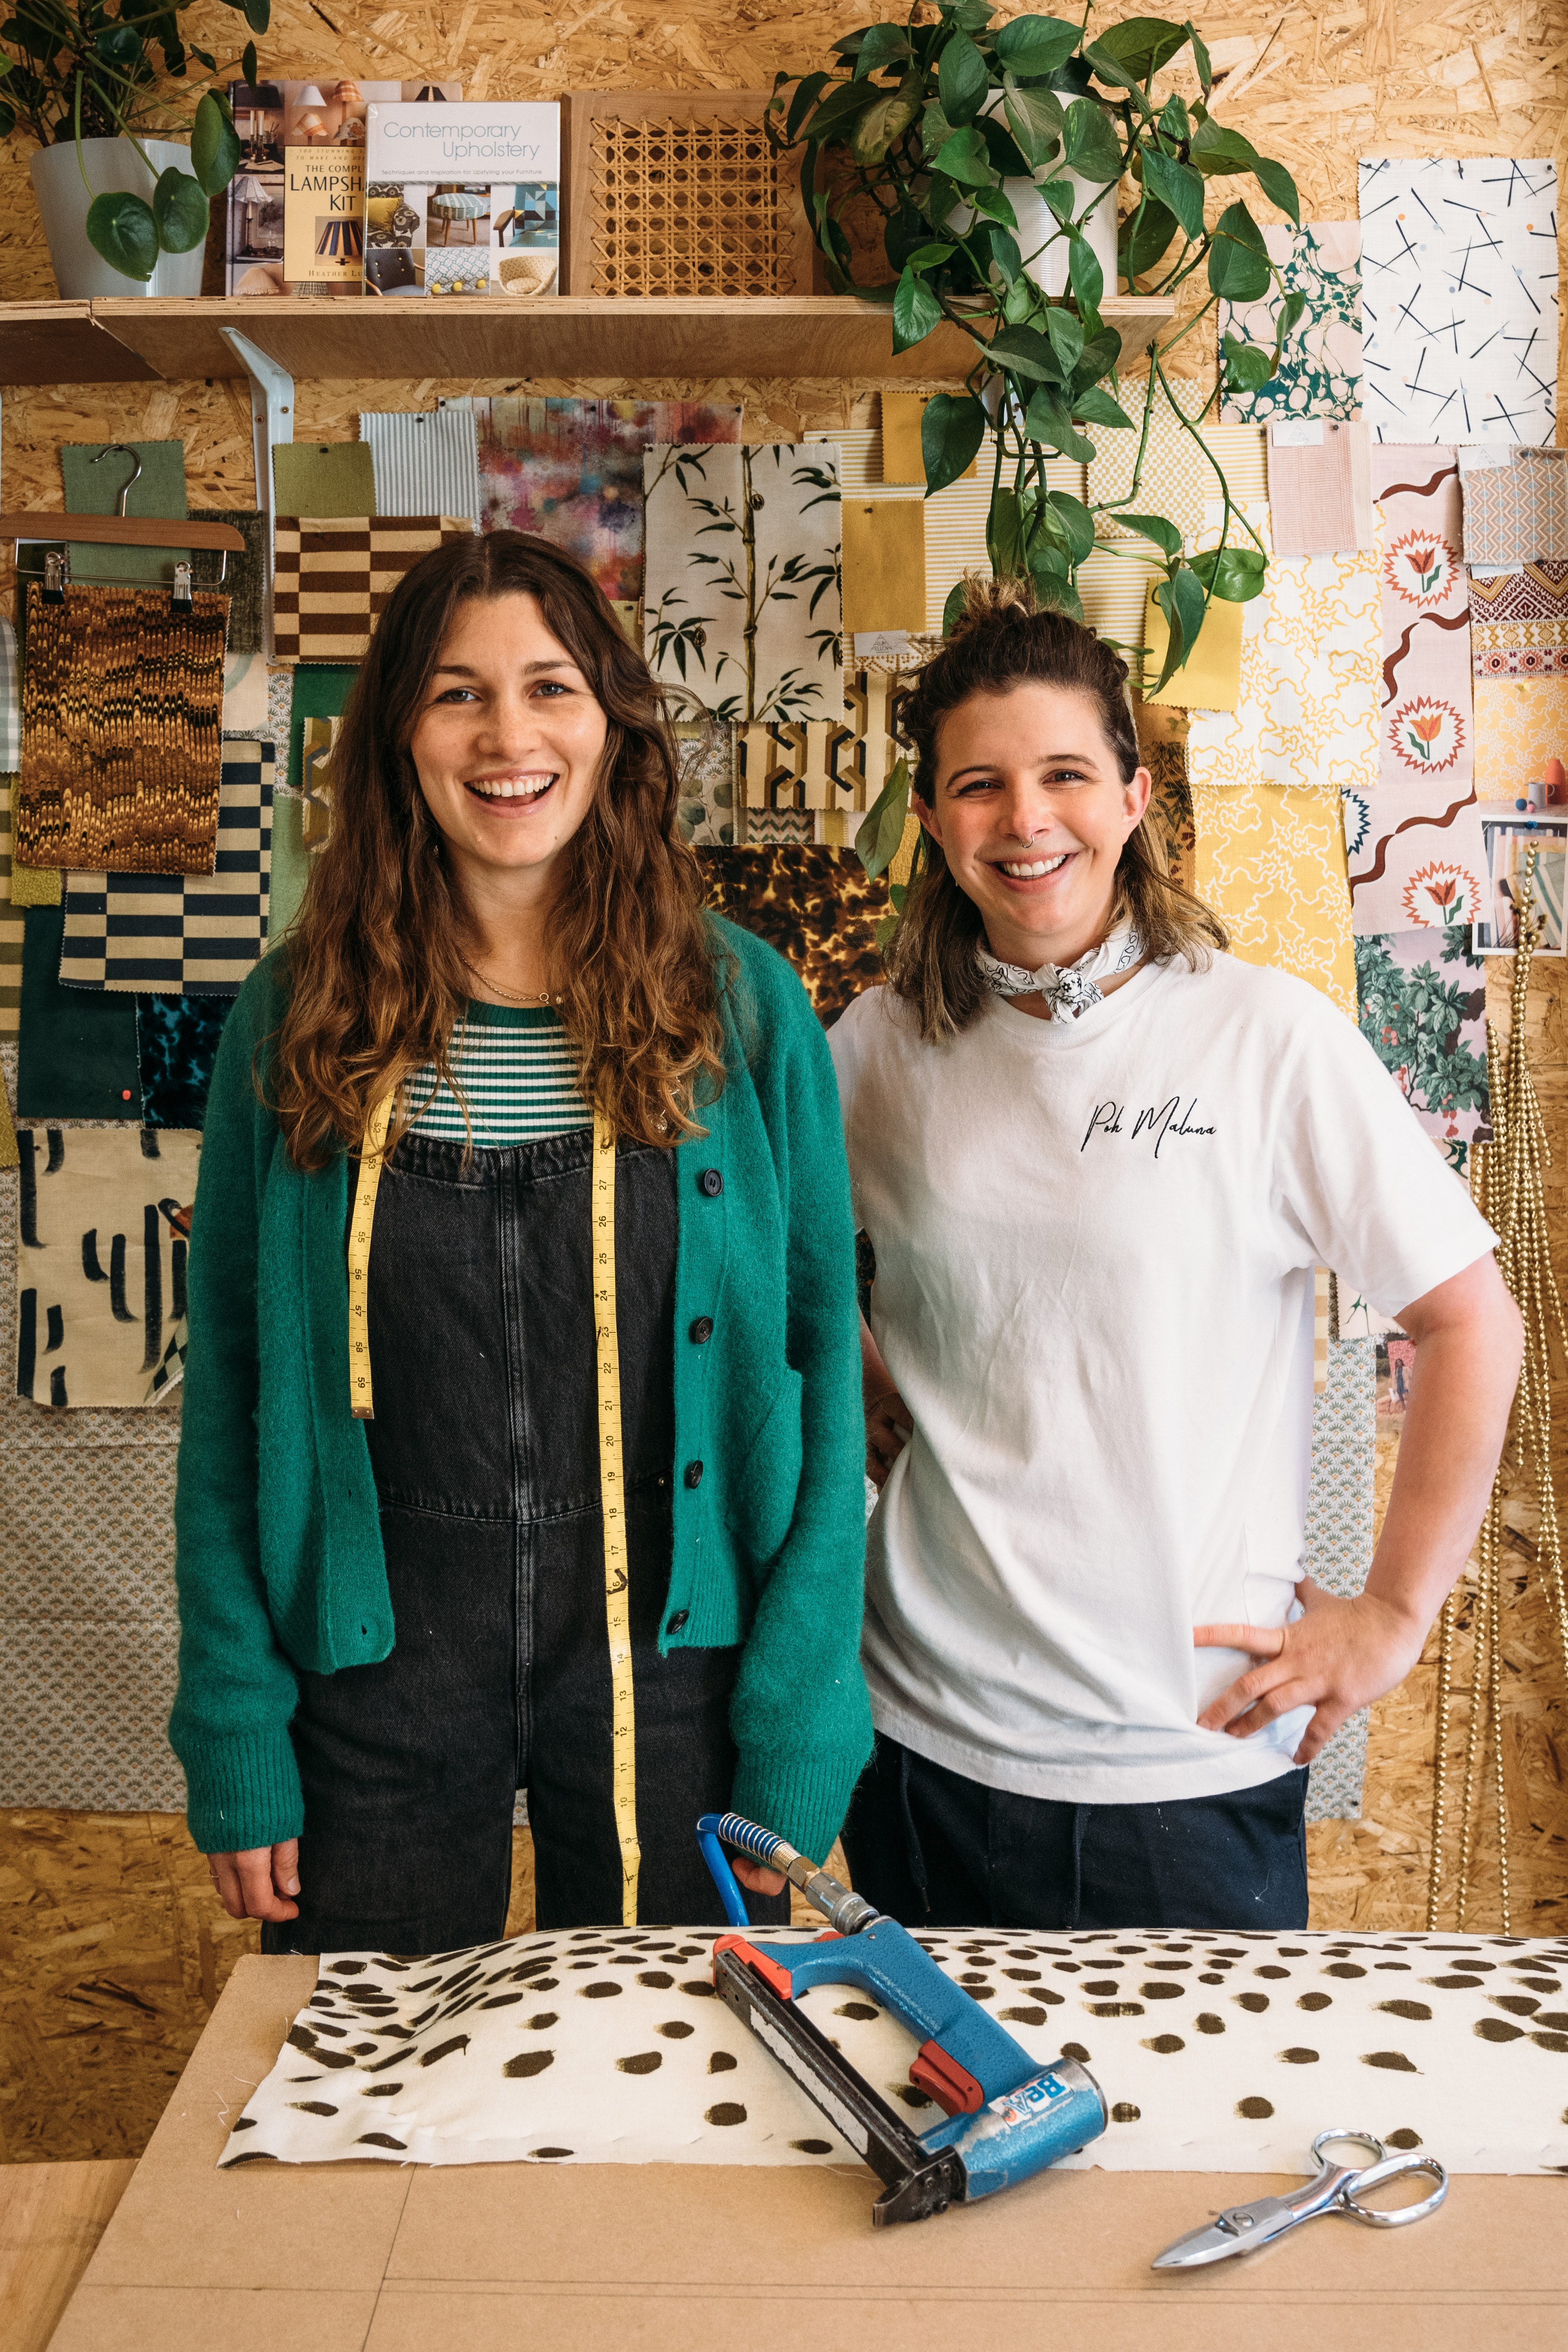 Jo and Jess smiling in front of their workbench with fabric and upholstery tools in front of them.